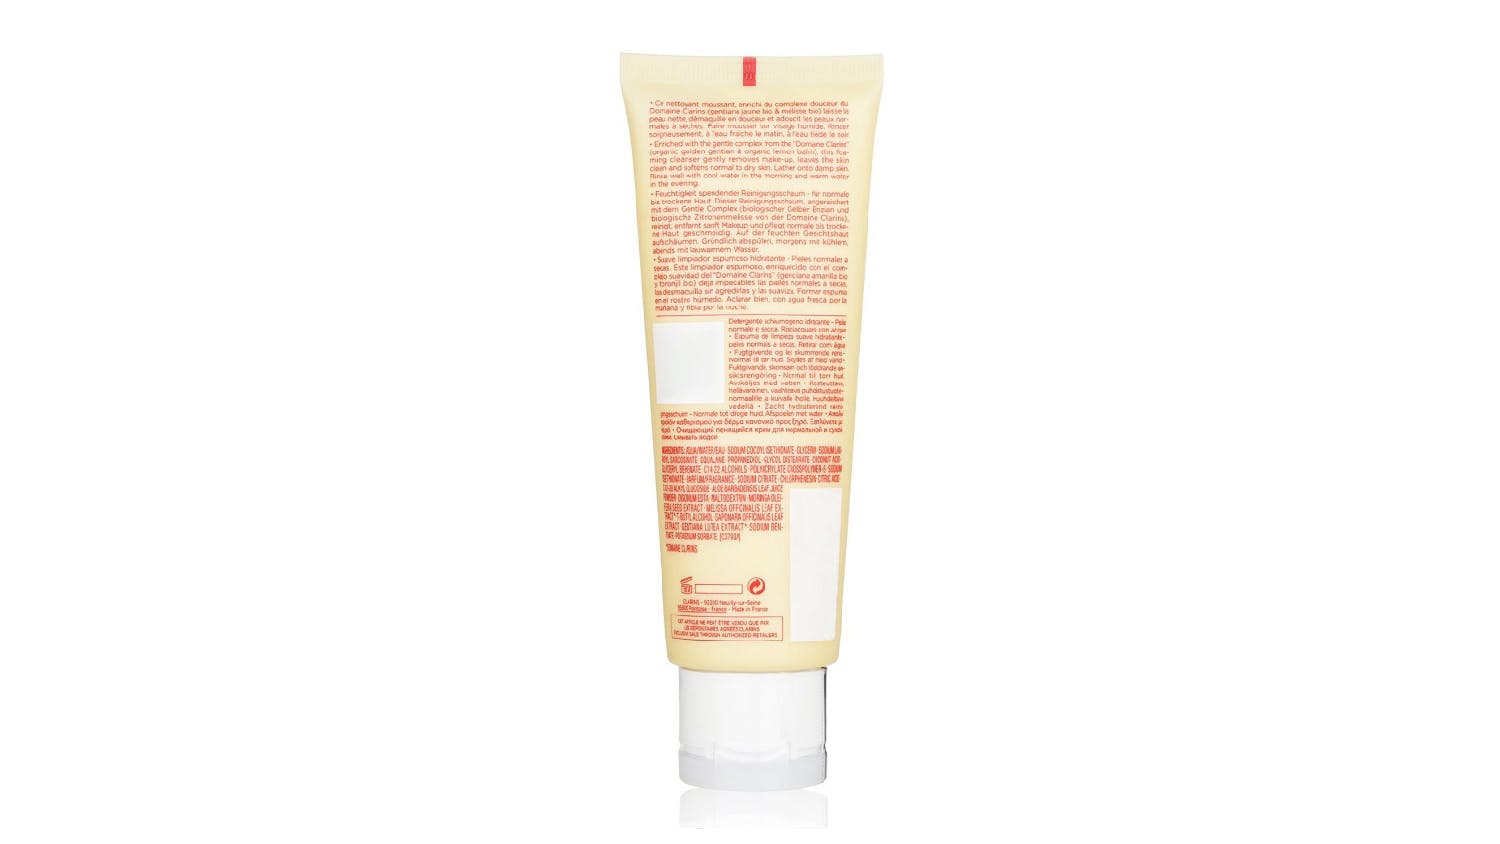 Clarins Hydrating Gentle Foaming Cleanser with Alpine Herbs & Aloe Vera Extracts - Normal to Dry Skin - 125ml/4.2oz